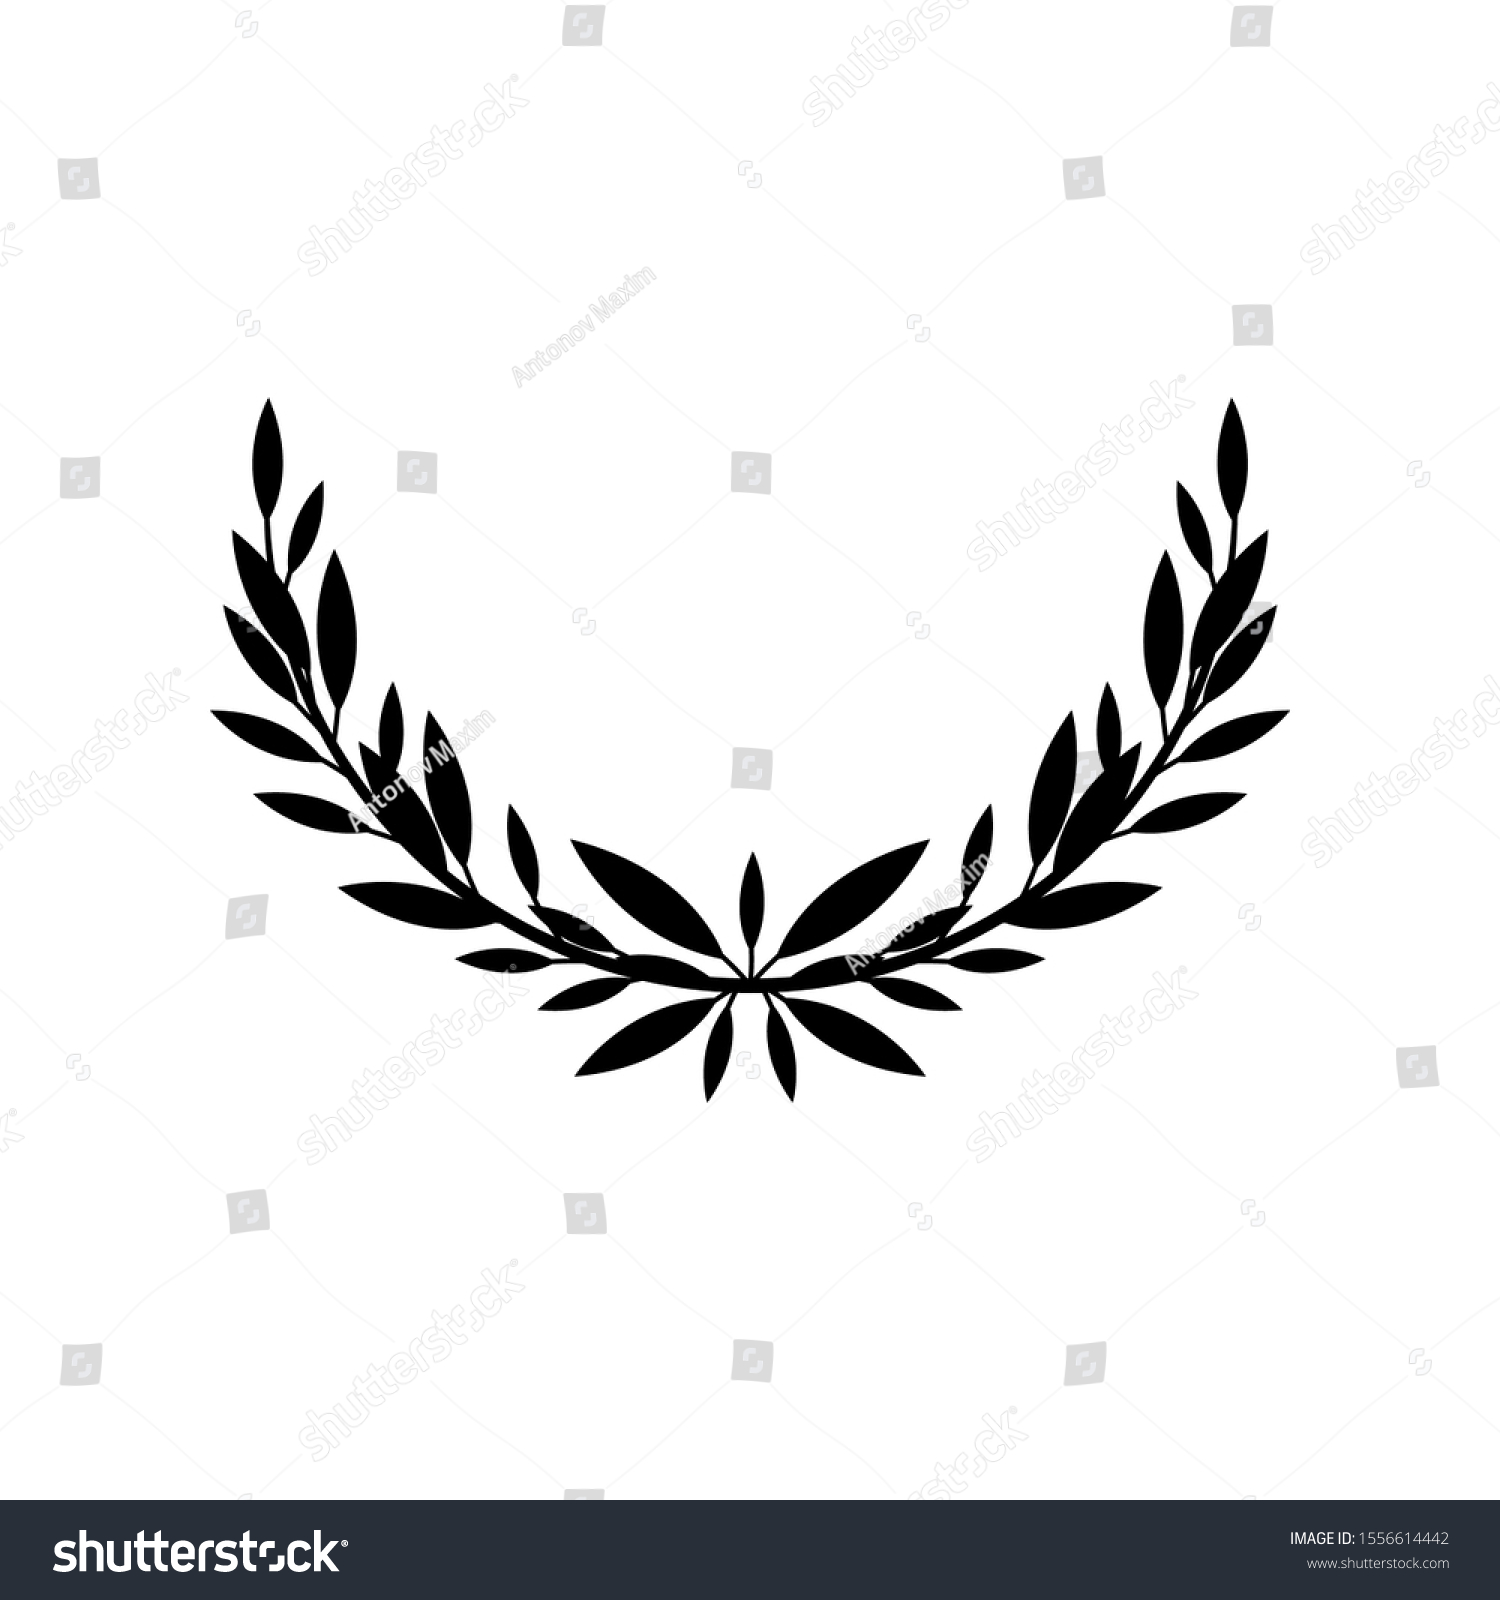 SVG of Greek laurel or olive half of wreath for winners award or decorative leaf frame vector illustration isolated on white background. Heraldic element of honor and glory black icon. svg